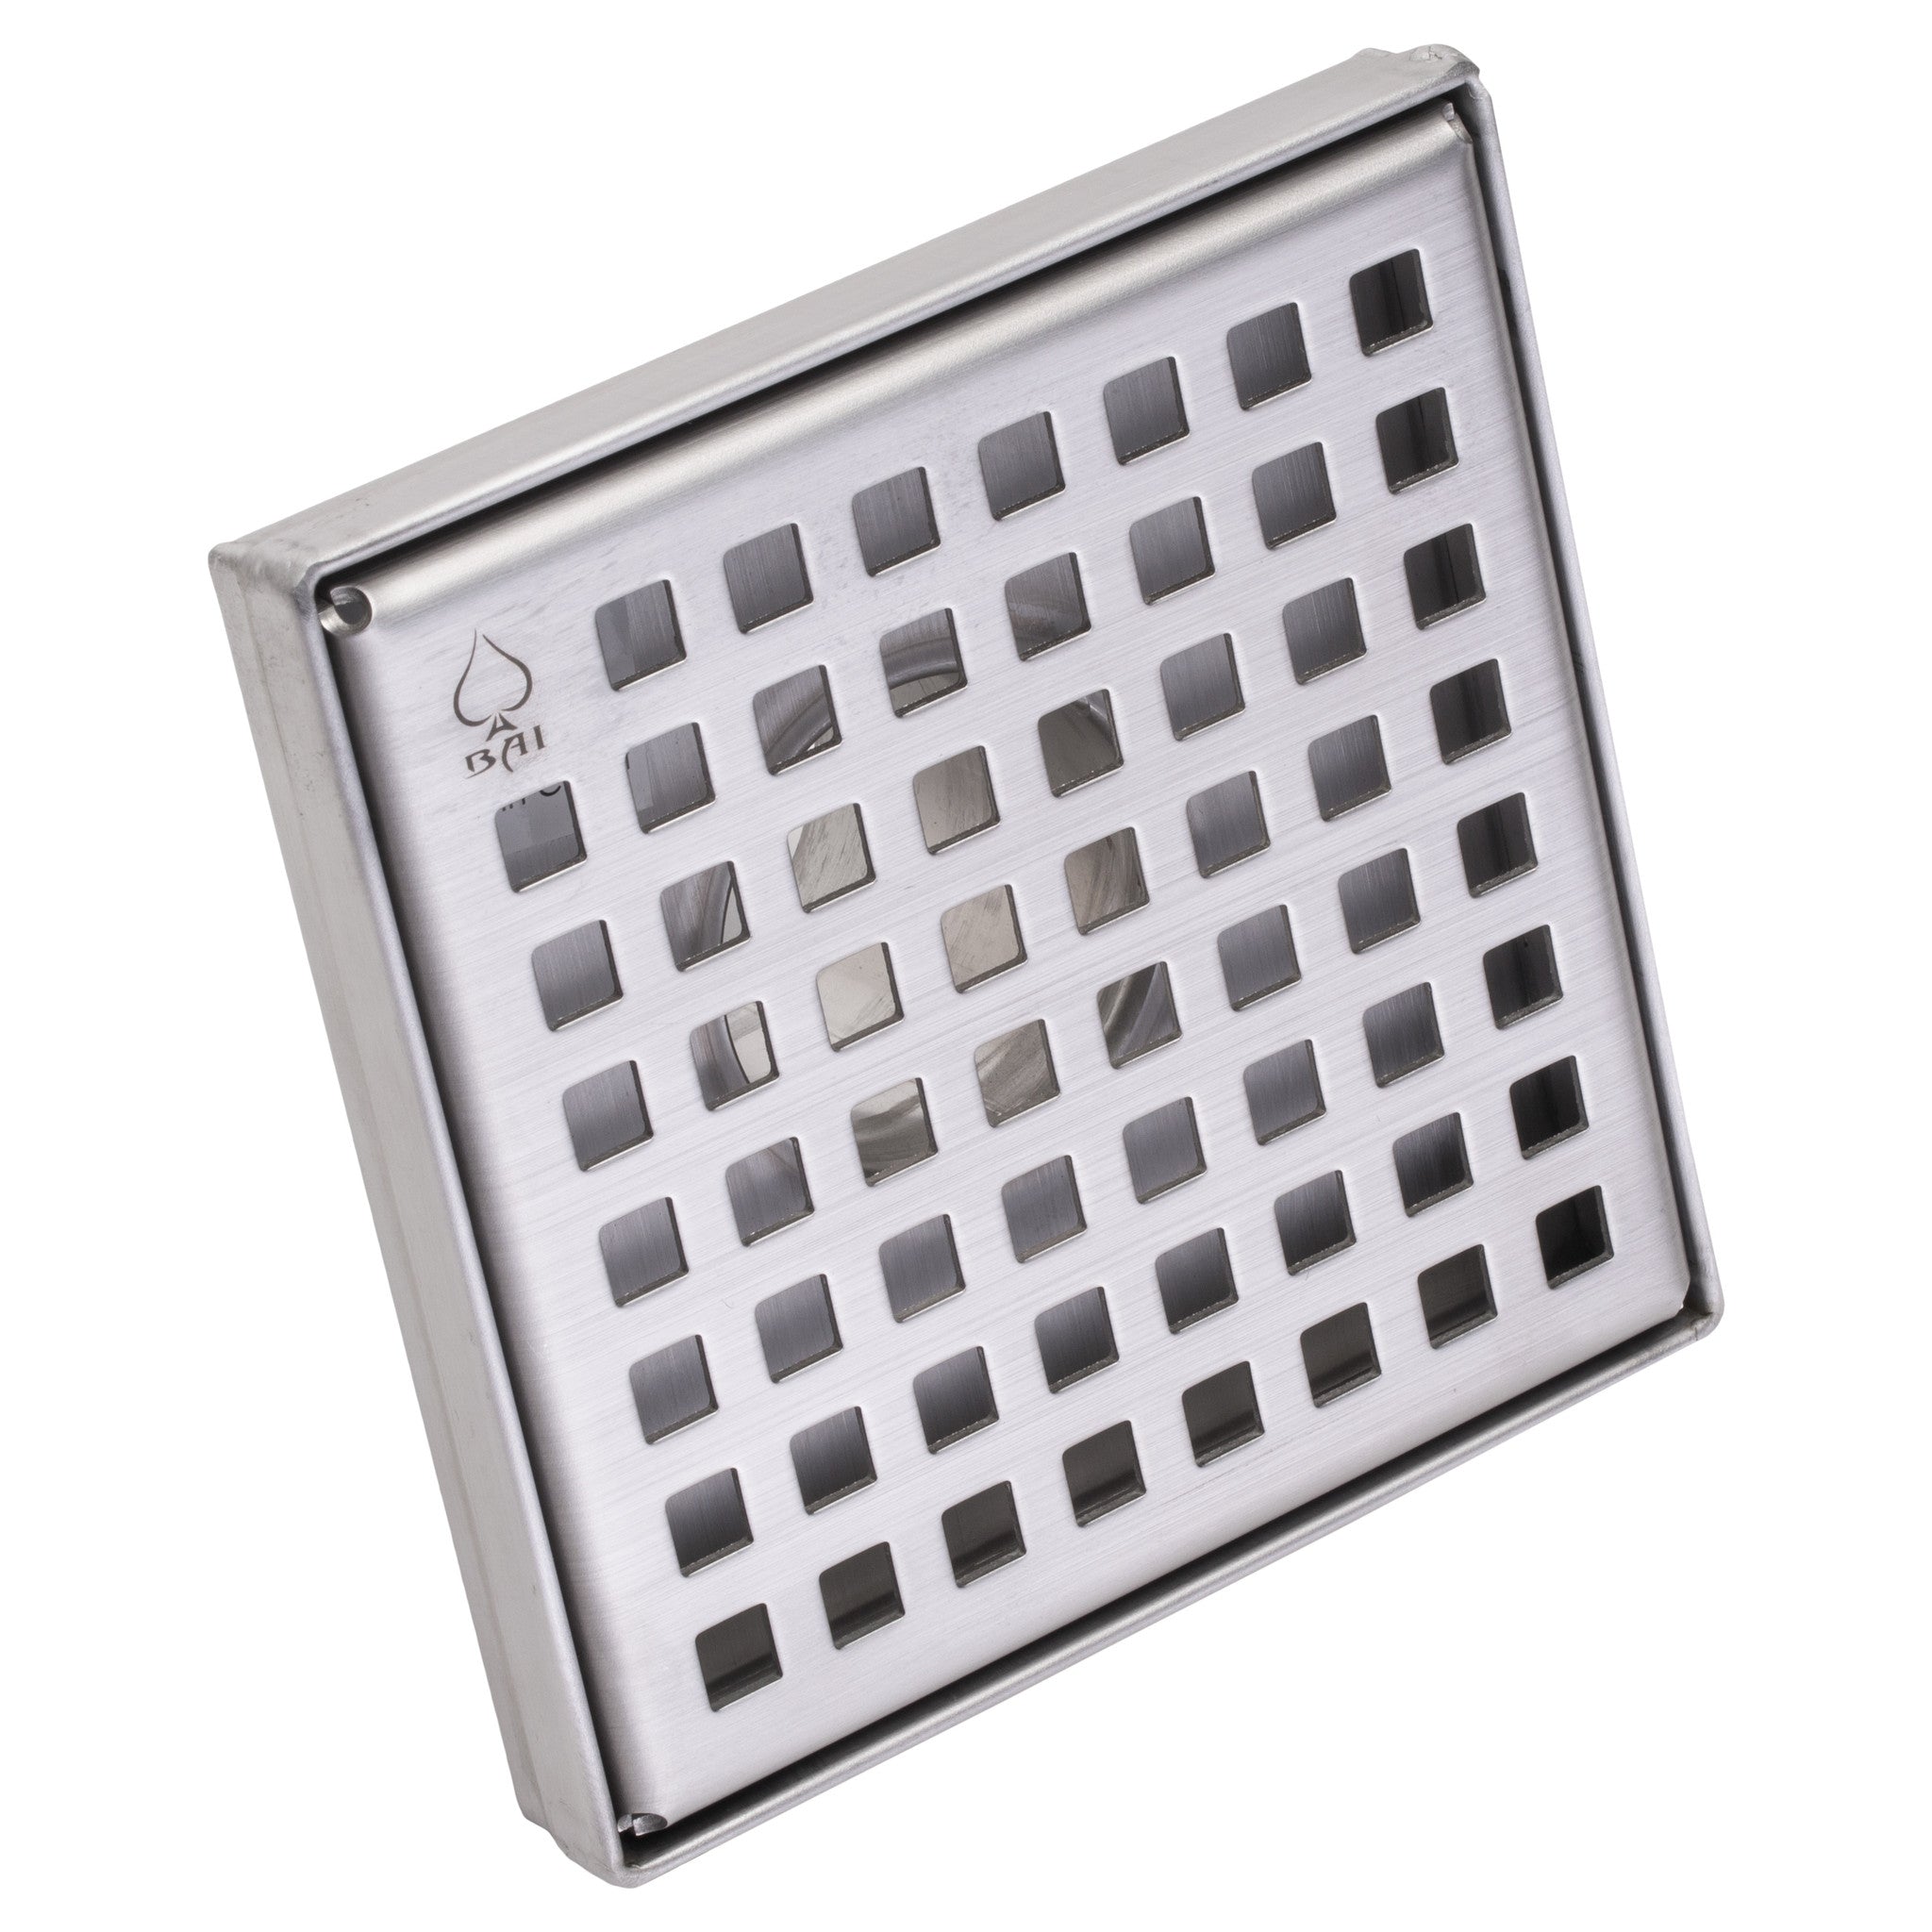 Built Industrial 5.8-Inch Stainless Steel Square Shower Drain Cover for  Bathrooms, Showers, and Sinks, Floor Drain with 2 In Bottom Outlet, Silver